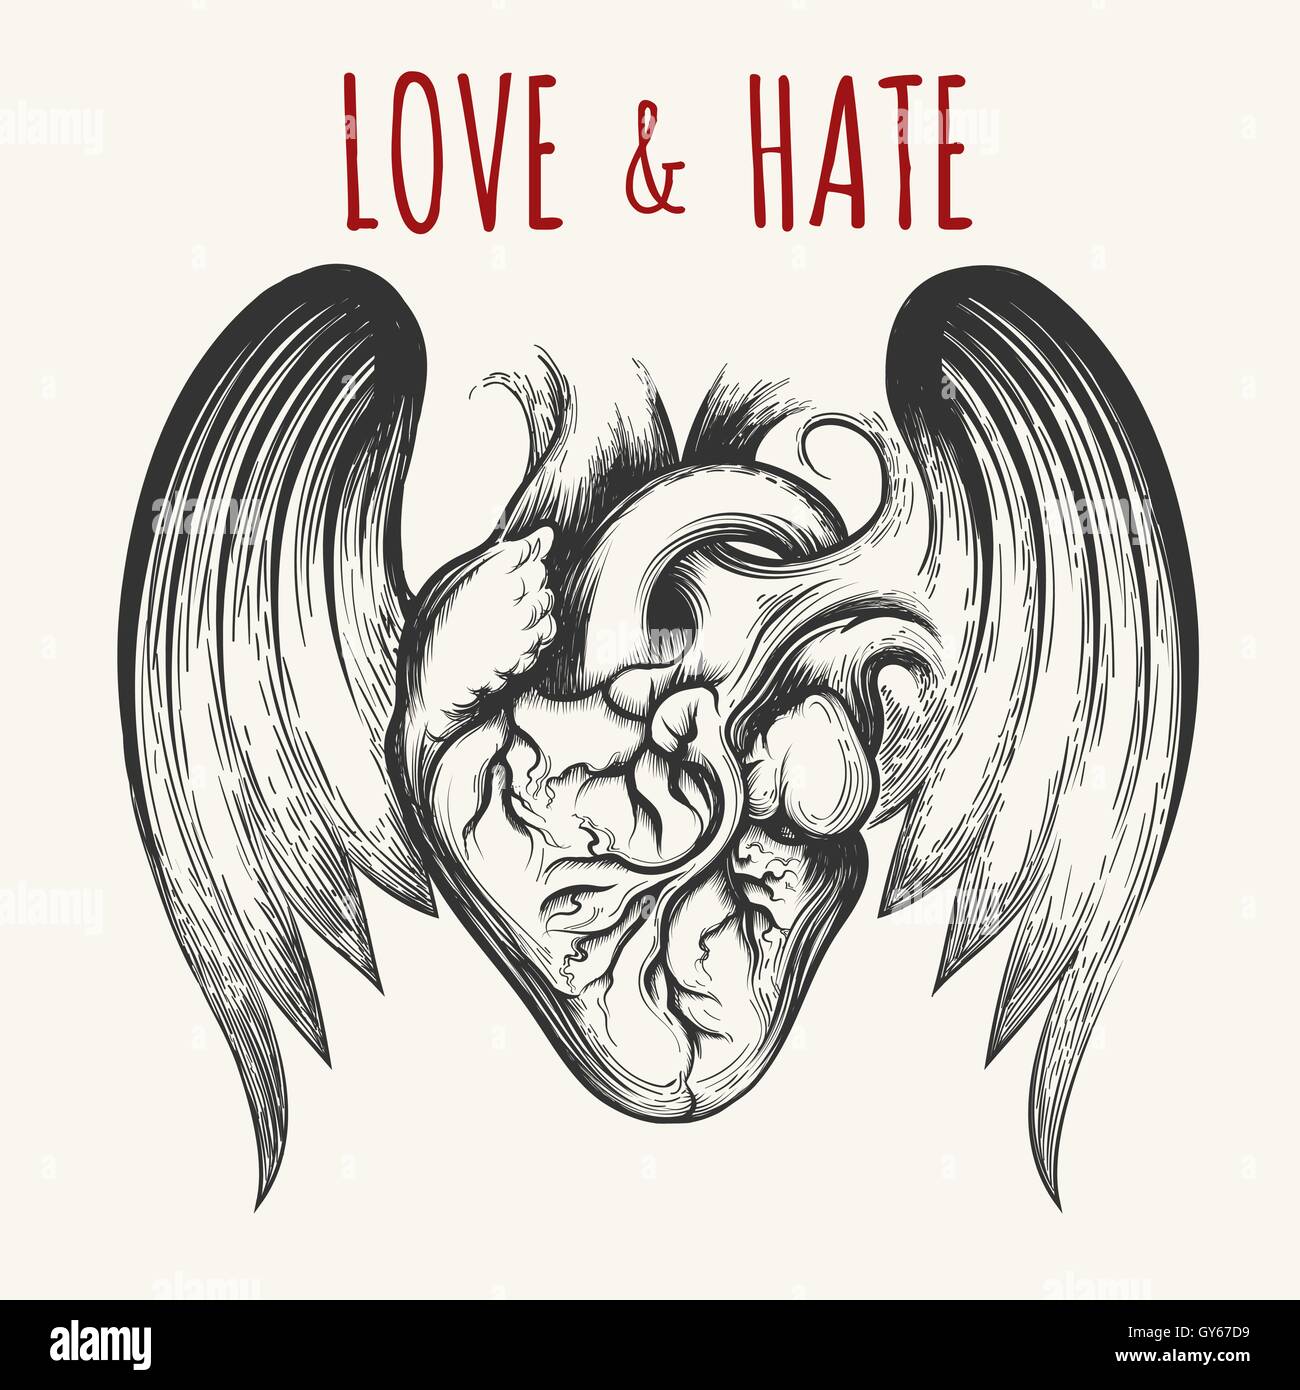 Love & Hate tattoo. Human heart with wings and wording. Vector illustration Stock Vector